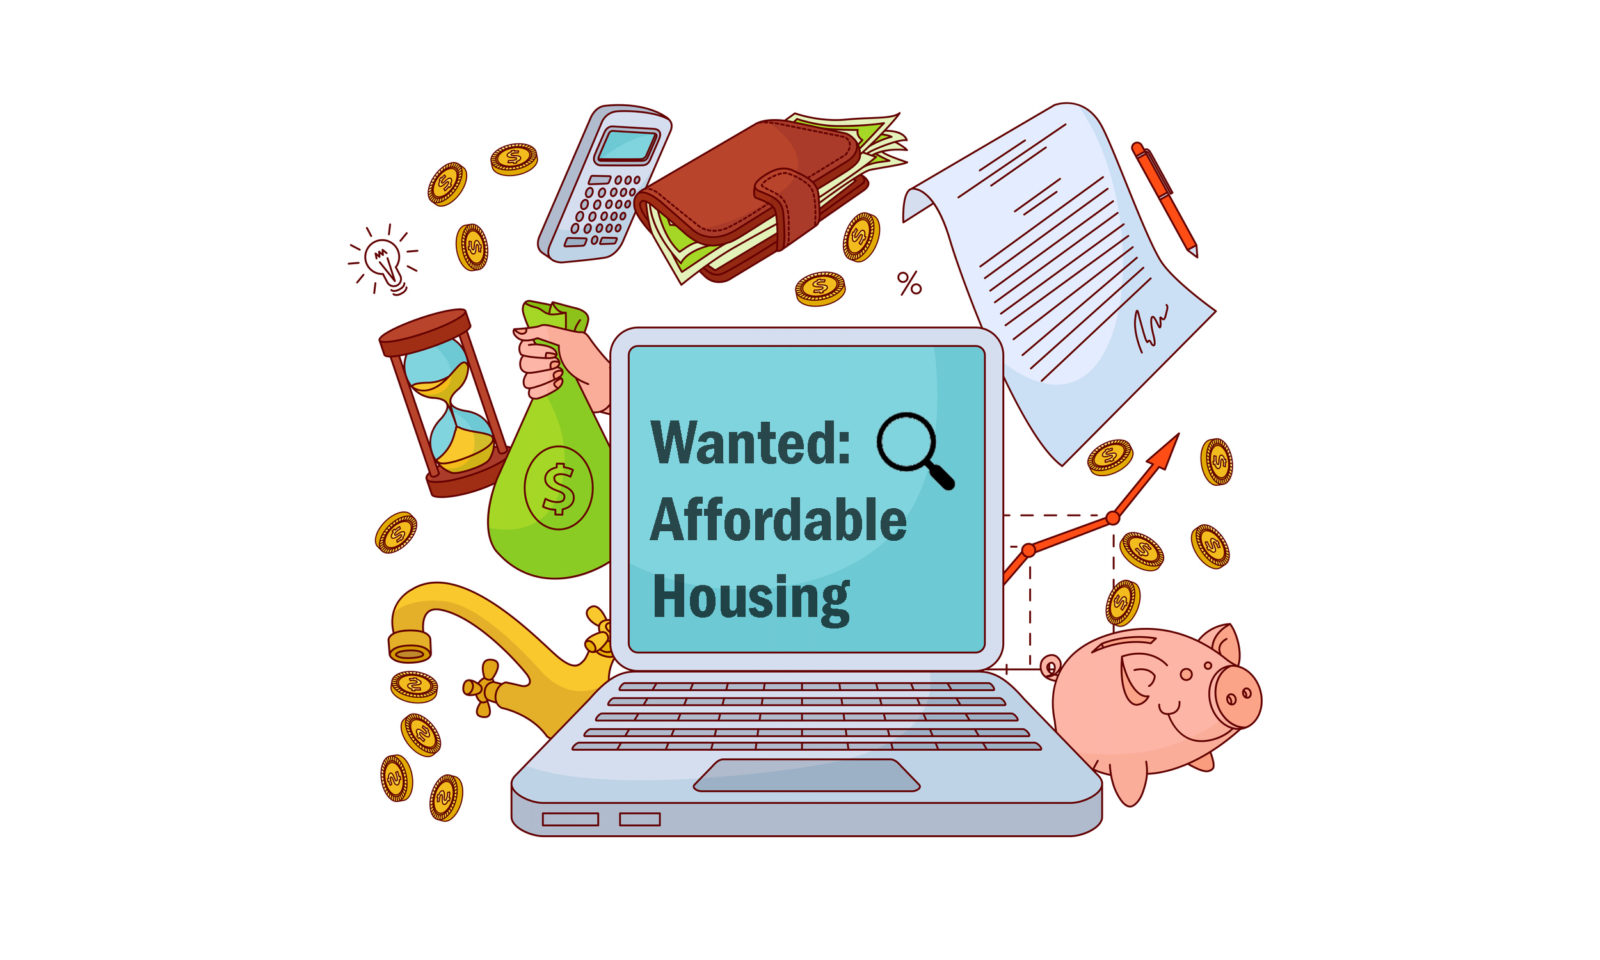 Computer screen reads "Wanted: Affordable Housing," surrounded by hand-drawn laptop, wallet, calculator, money, moneybag and savings chart